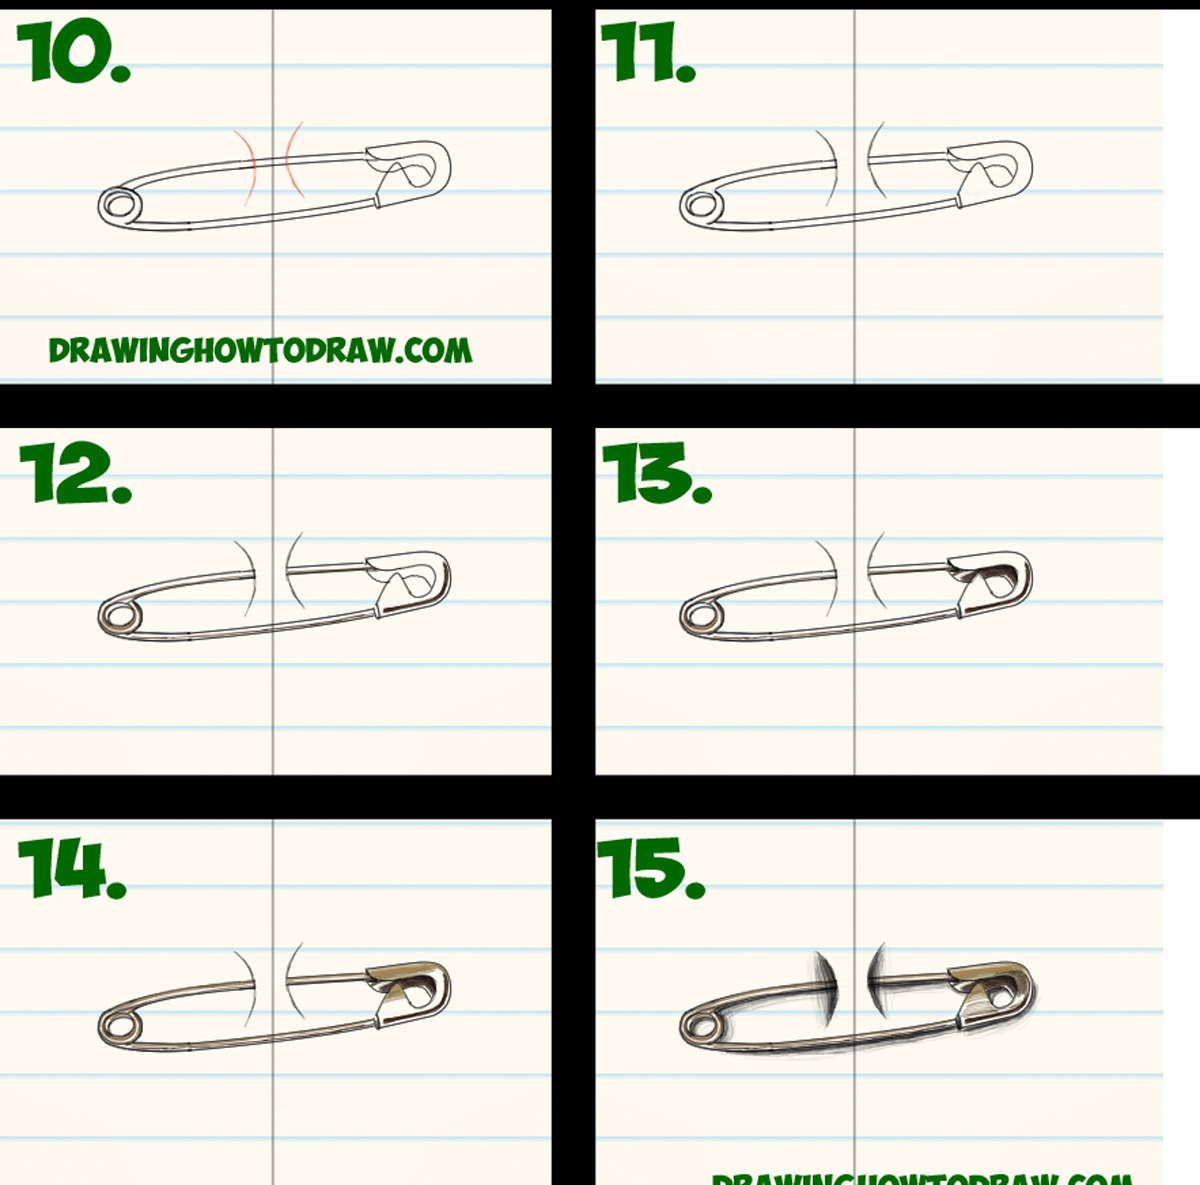 Learn How to Draw Cool Stuff - Draw a Safety Pin Holding 2 Pieces of Paper Together - Simple Steps Drawing Trick Lesson for Beginners